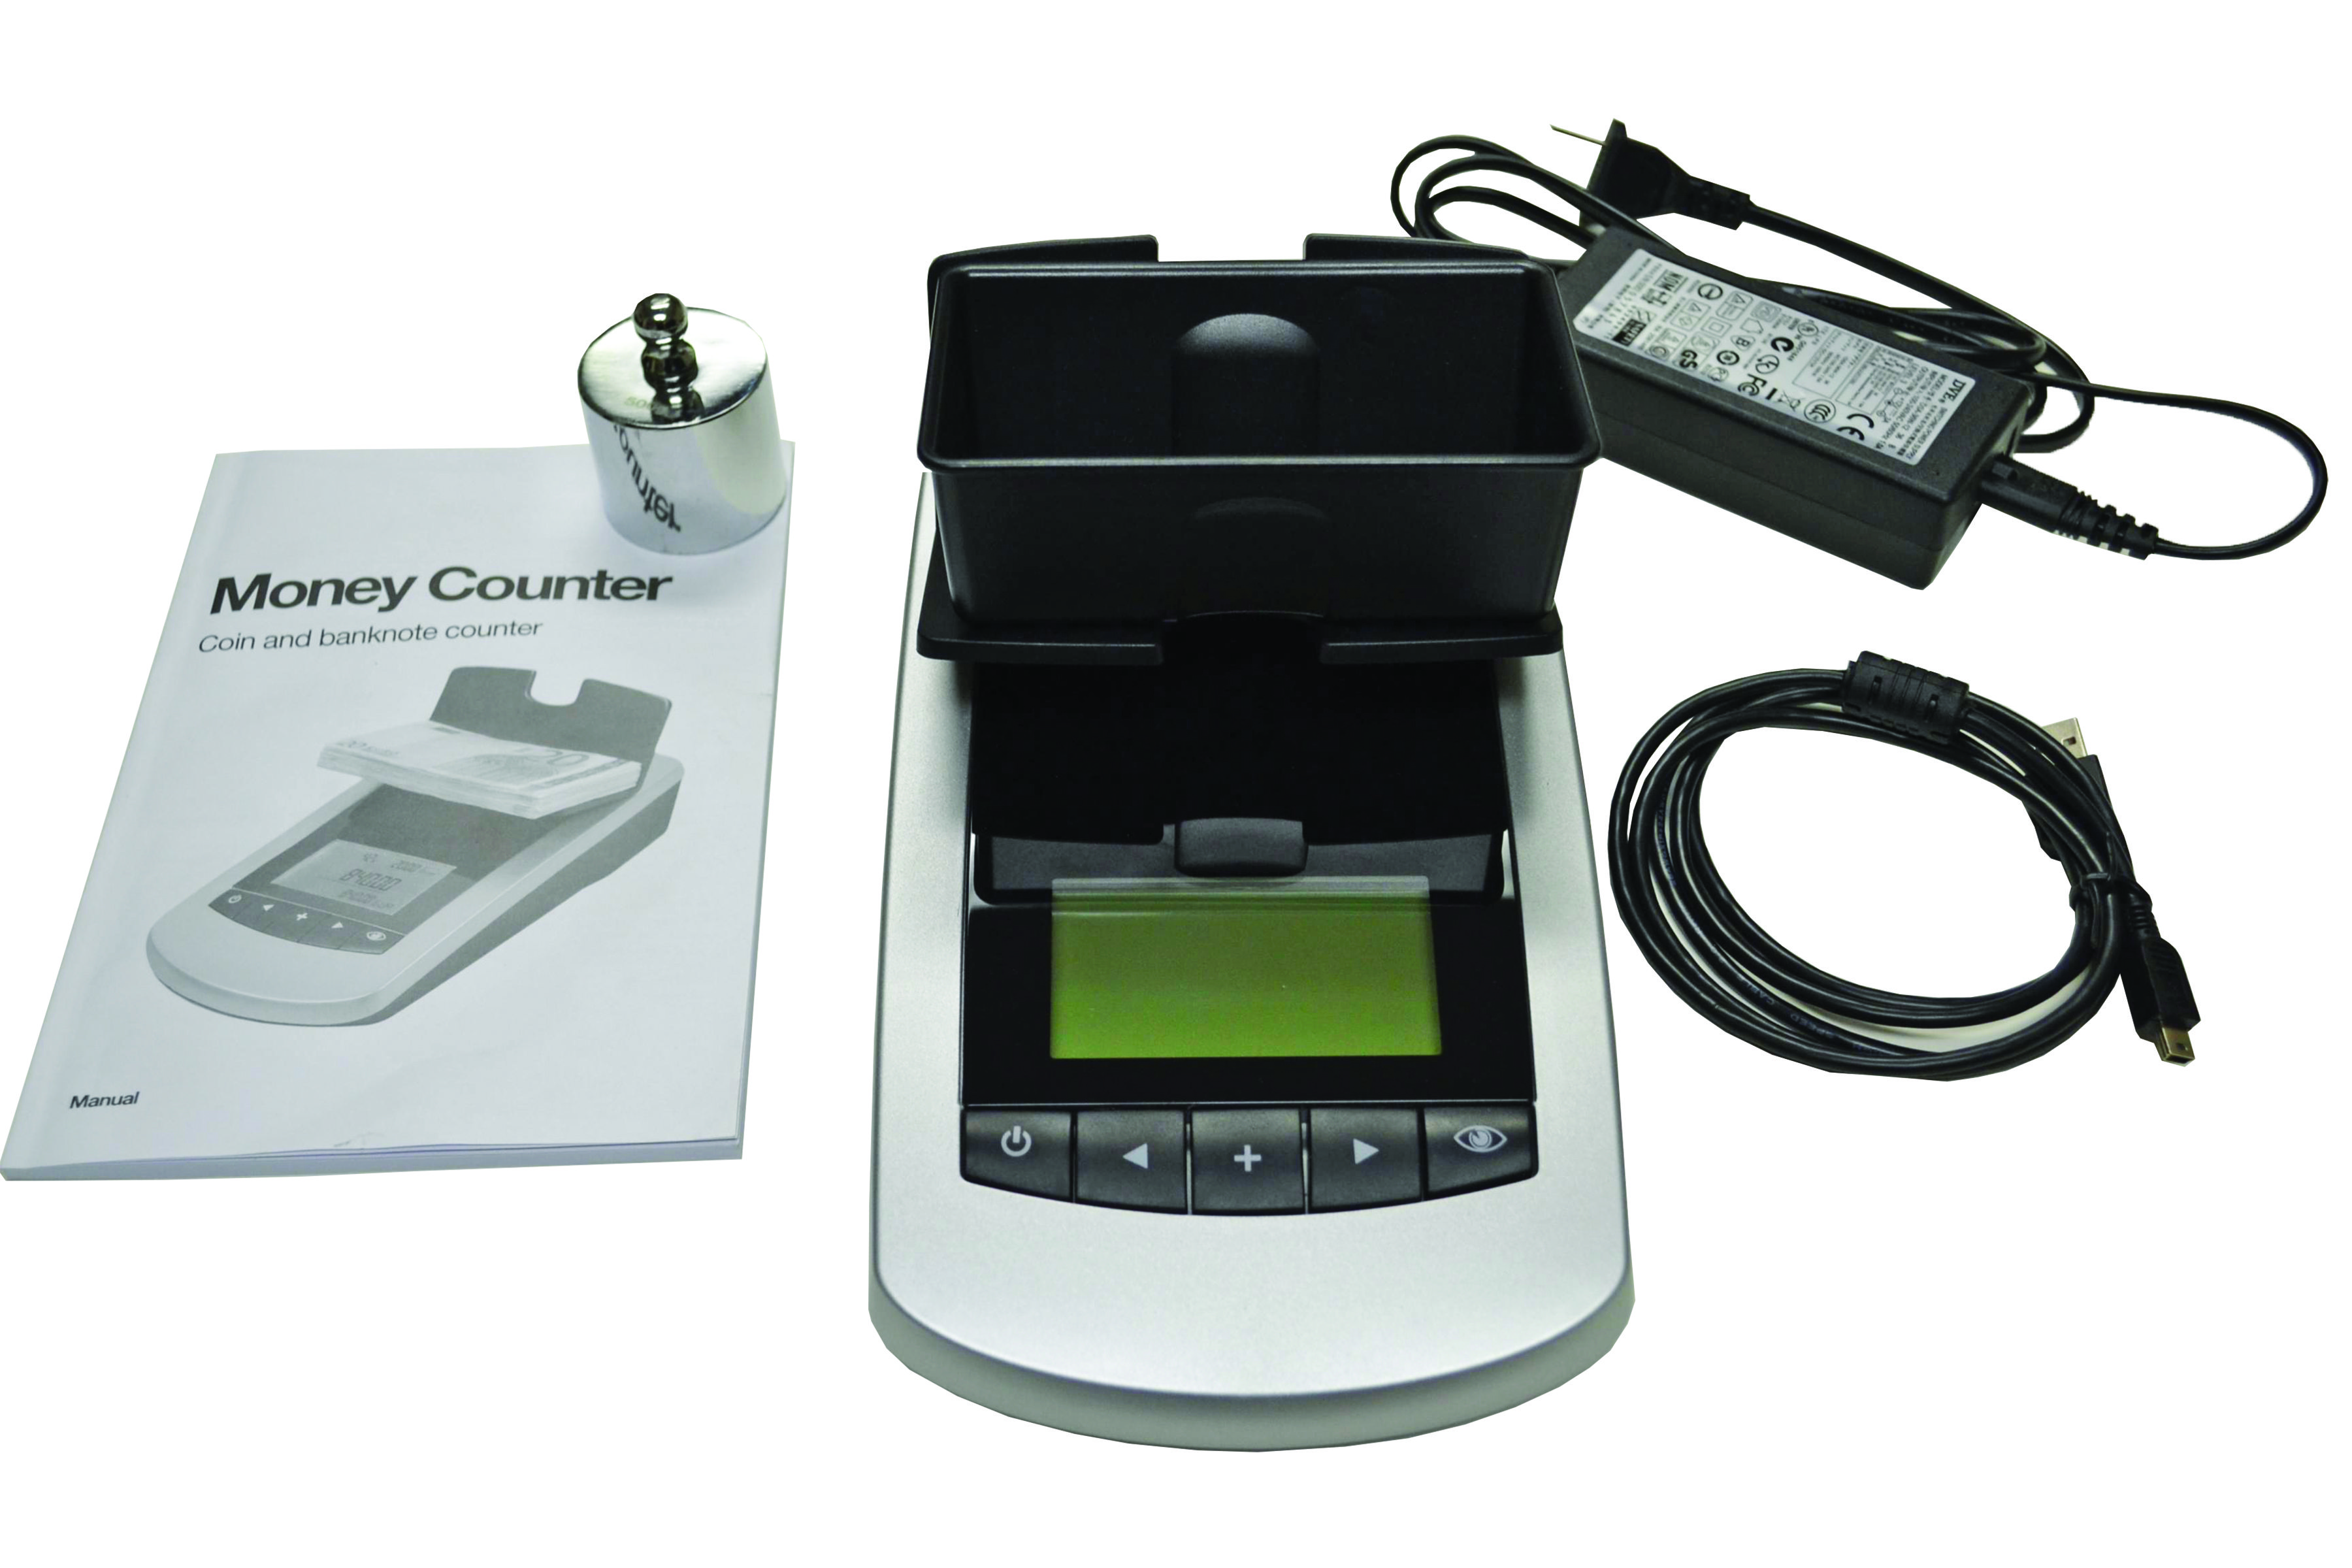 MCS-1000: Money Counting Scale Box Contents